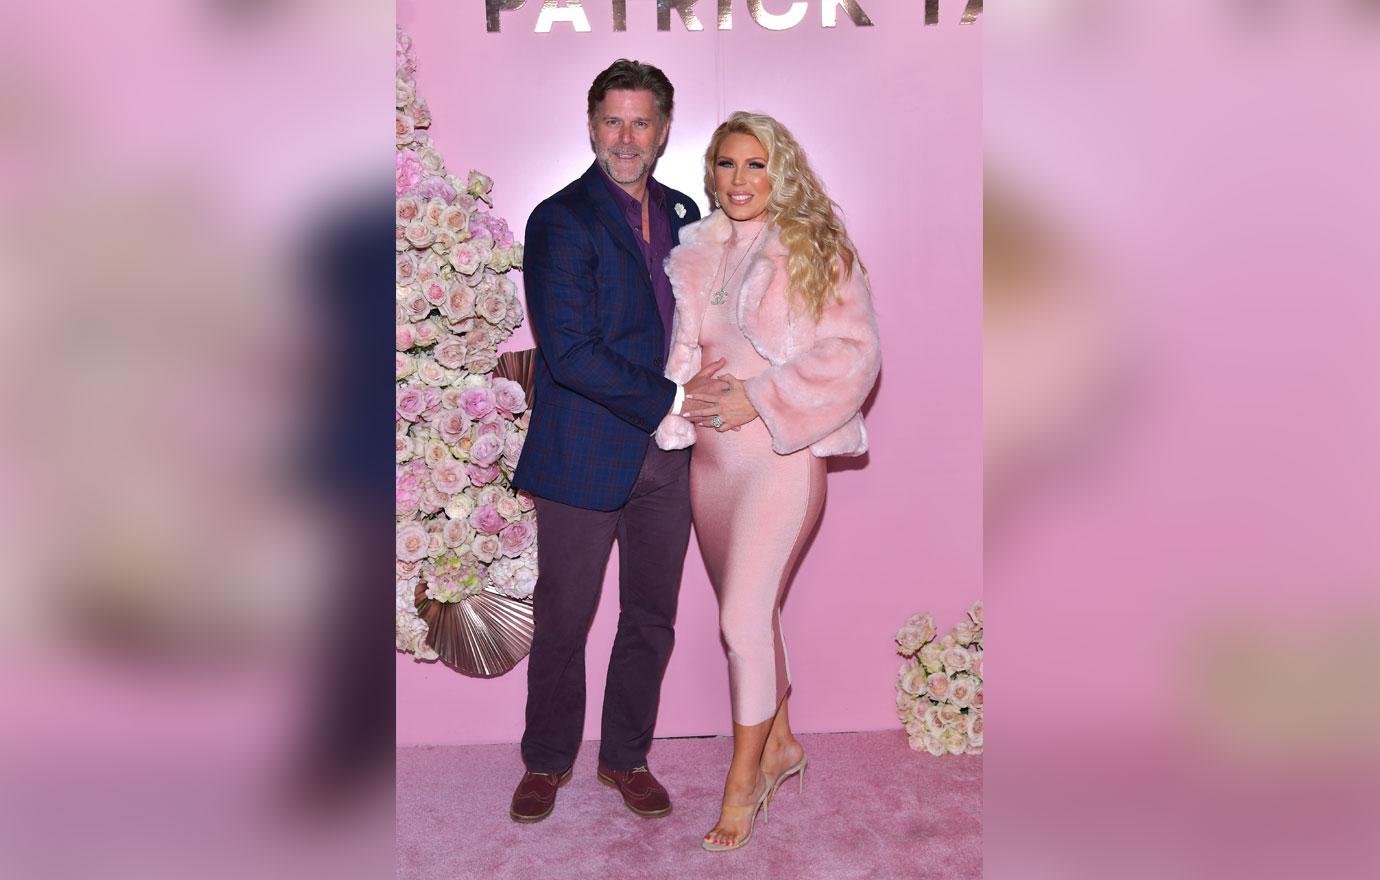 RHOC Very Pregnant Gretchen Rossi Shares Near-Naked Snap picture image